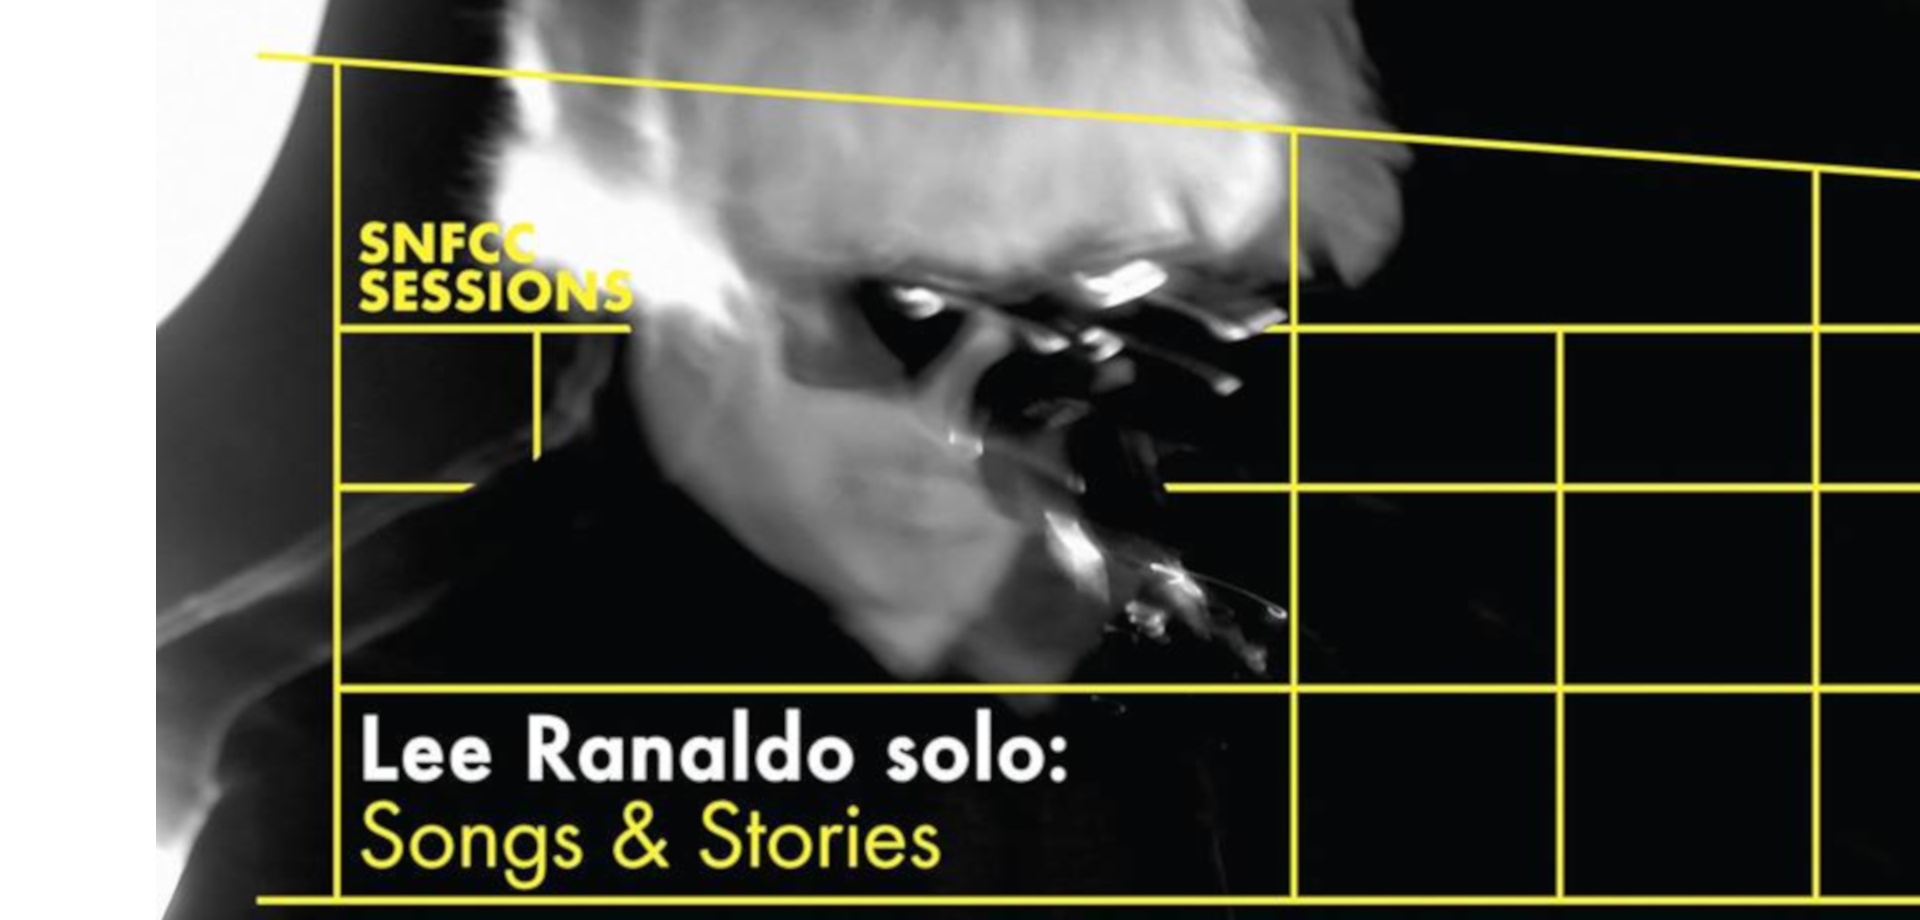 SNFCC Sessions: Lee Ranaldo solo - Songs & Stories